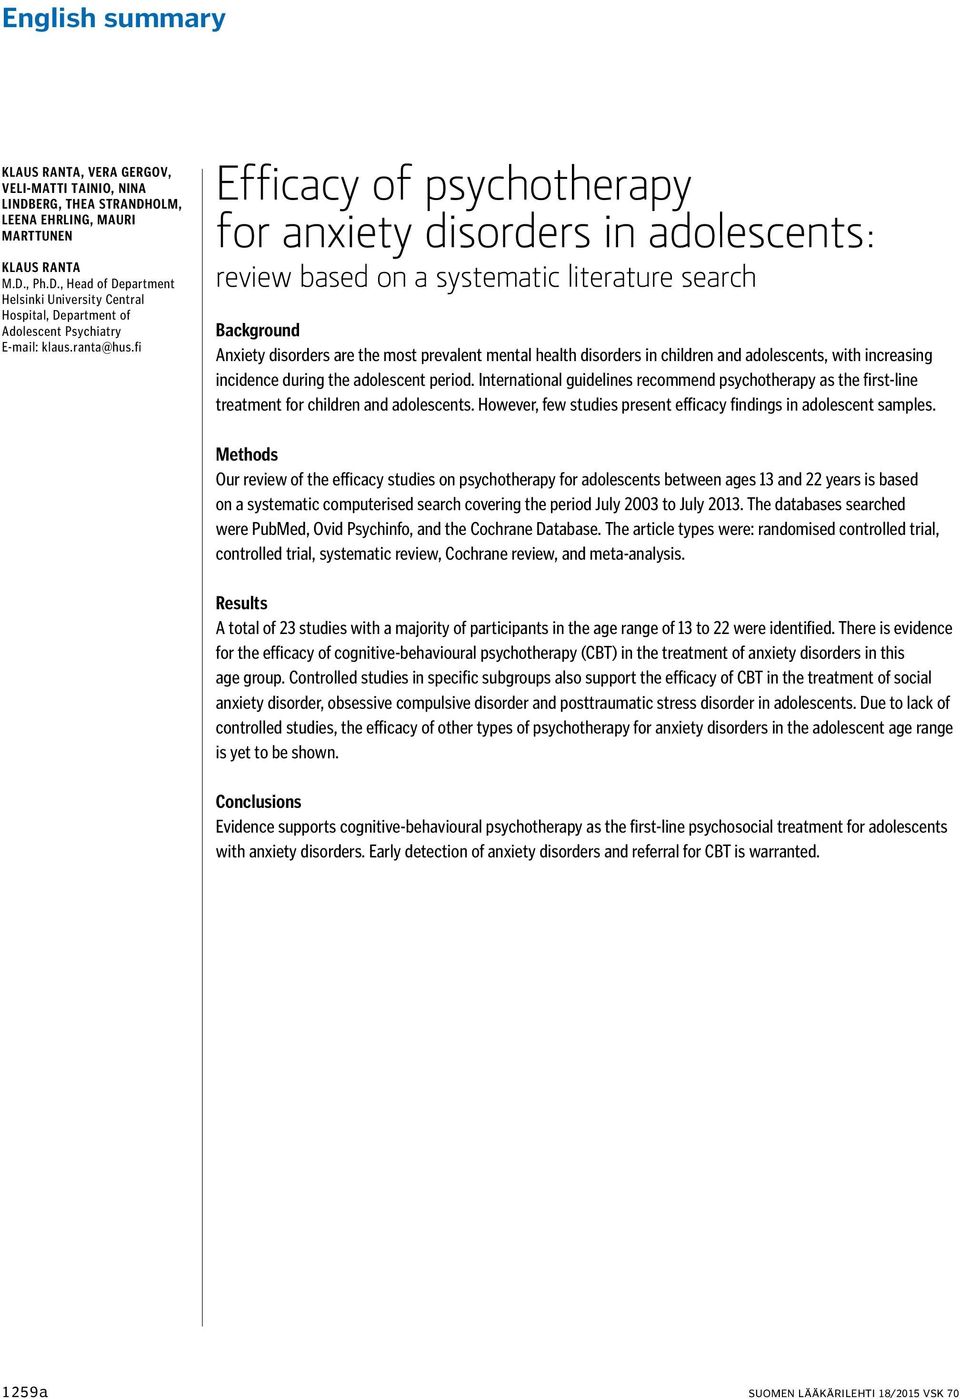 fi Efficacy of psychotherapy for anxiety disorders in adolescents: review based on a systematic literature search Background Anxiety disorders are the most prevalent mental health disorders in